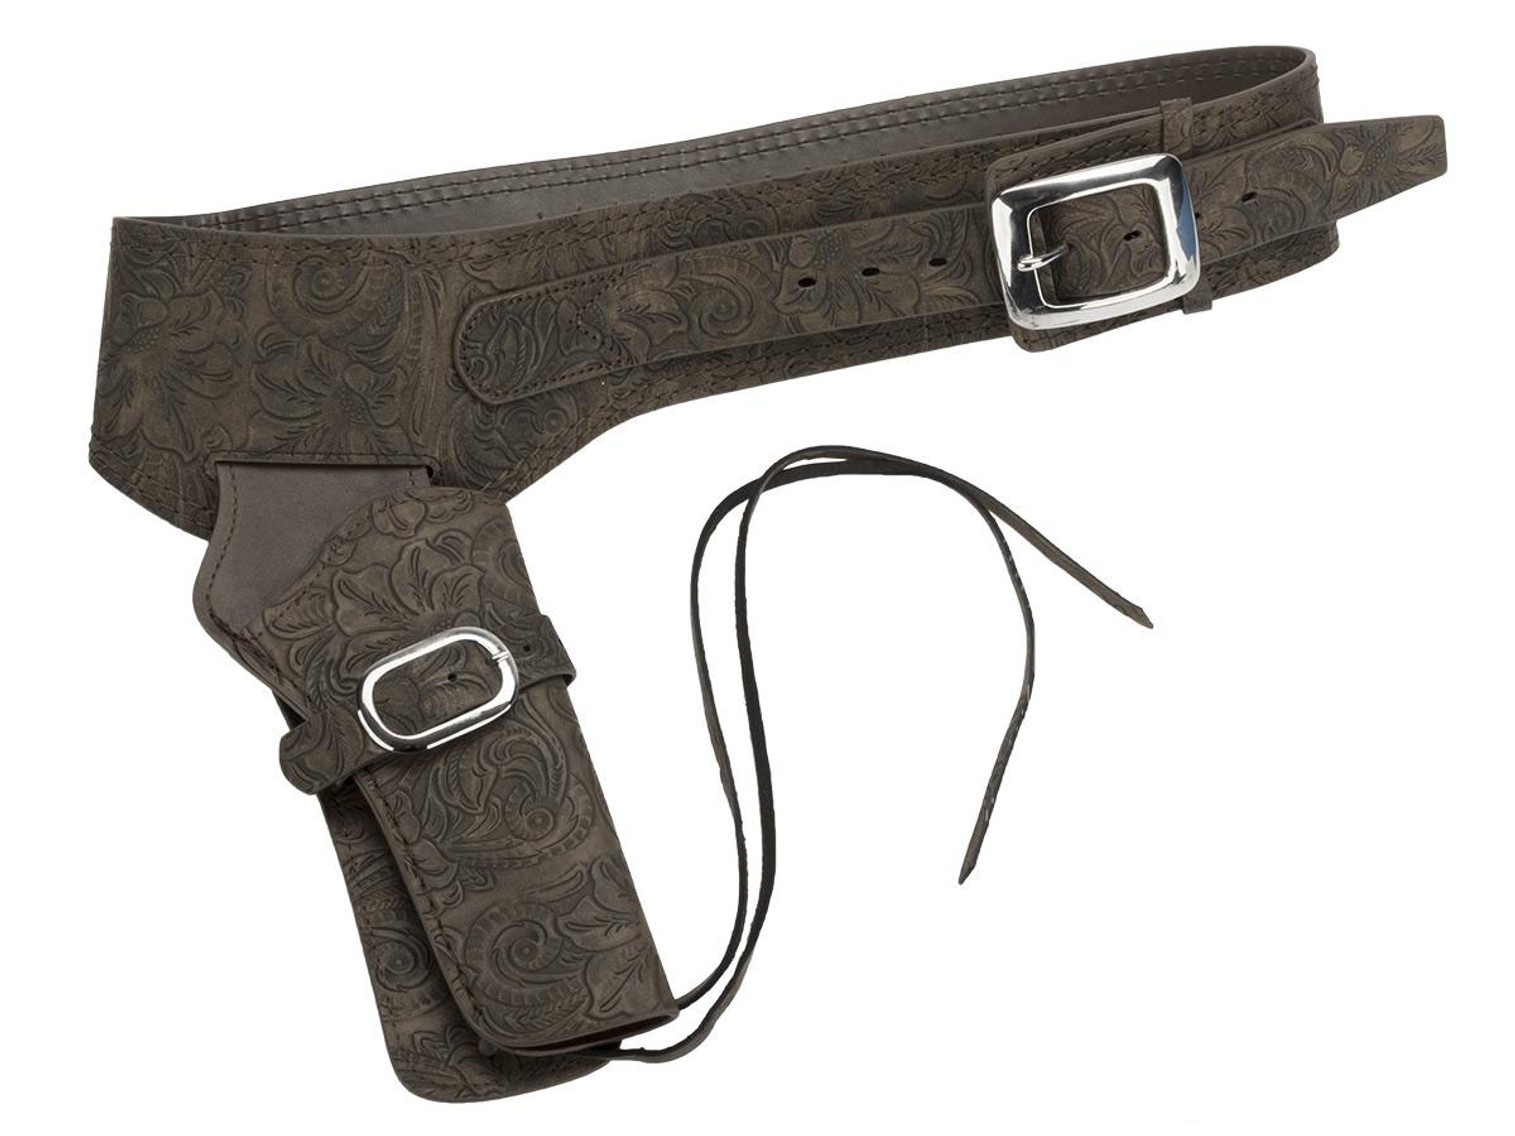 Gun Heaven Leather Single Gun Pistol Rig for Single Action Army Style Revolvers (Style: Patterned / Brown)